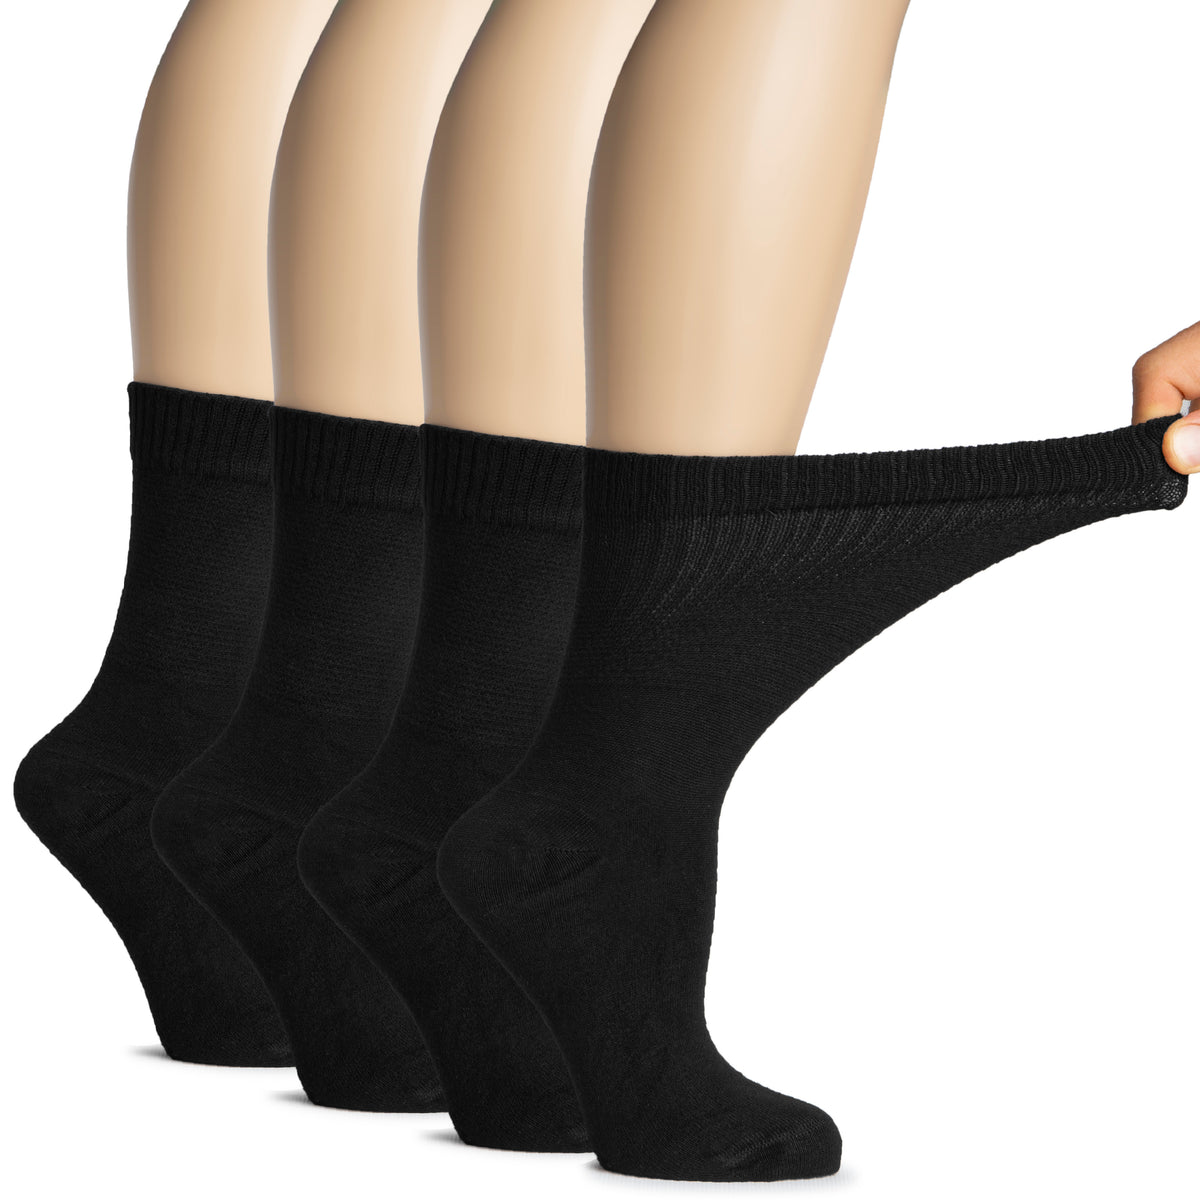 Elevate your sock game with these Women's Bamboo Diabetic Crew Socks, showcasing a black hue and one leg up design for added comfort.